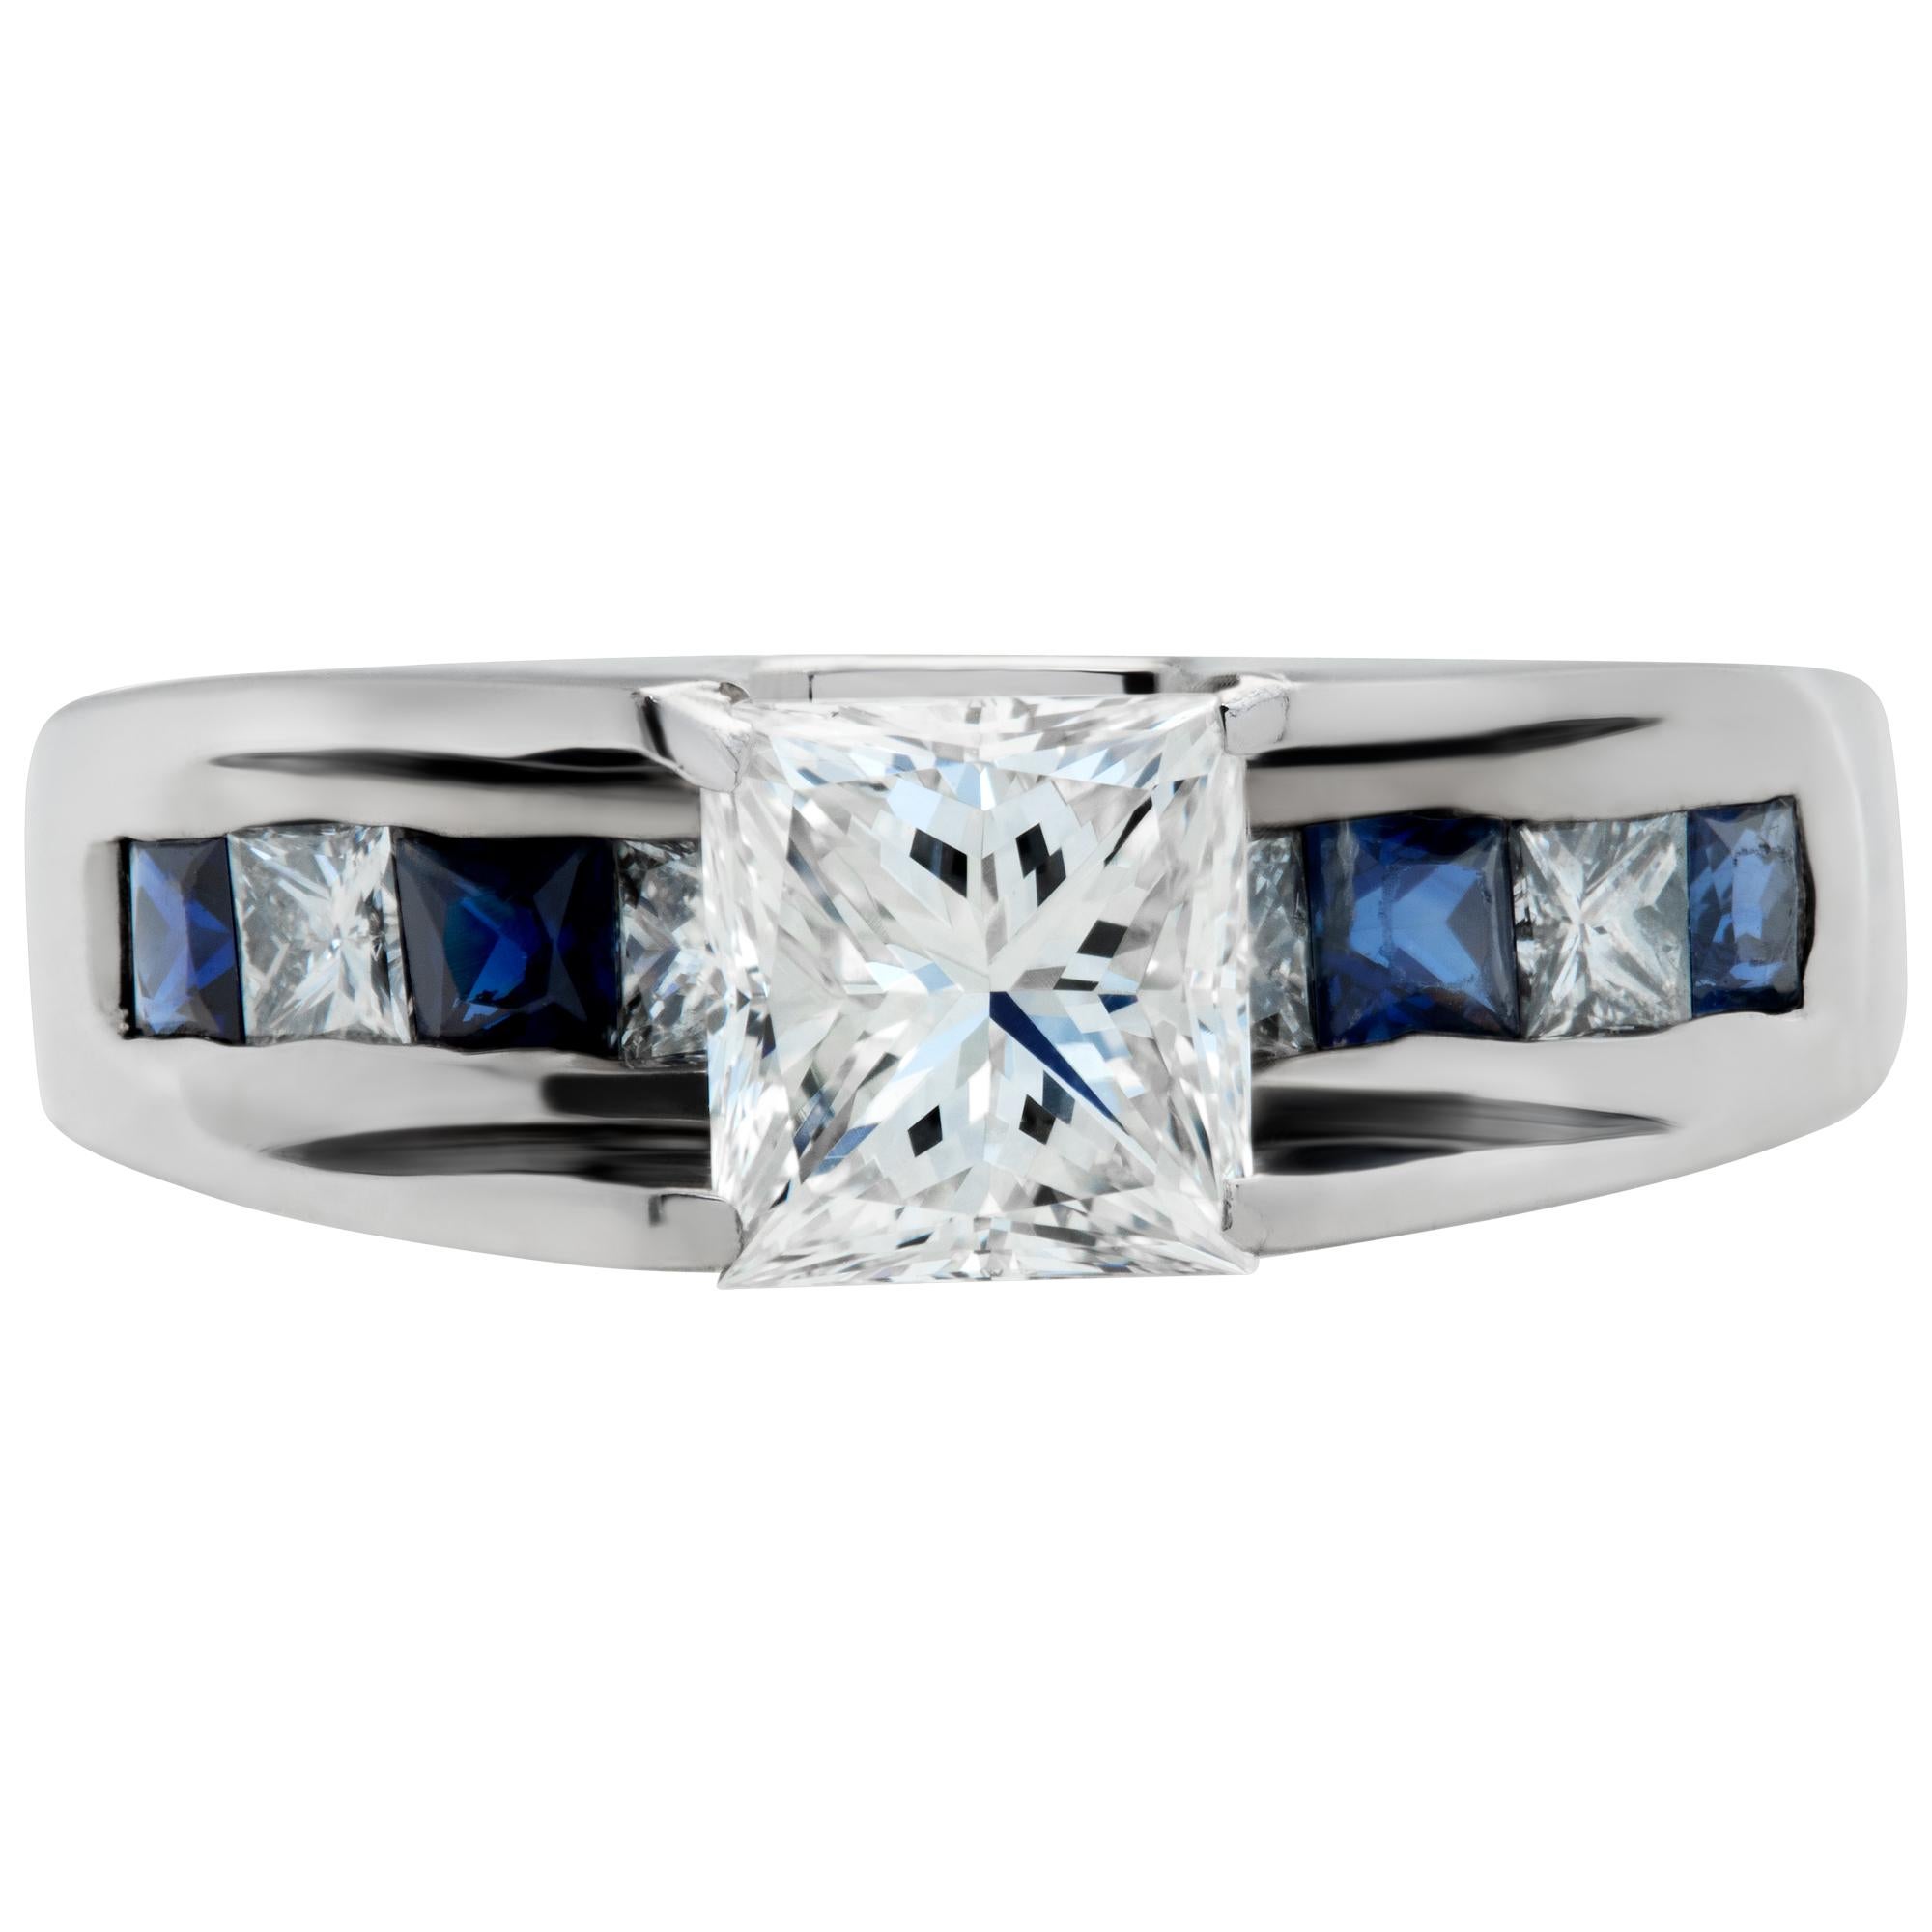 GIA Certified Princess Cut Diamond 1.01 Cts 'H Color, VS2 Clarity' Ring